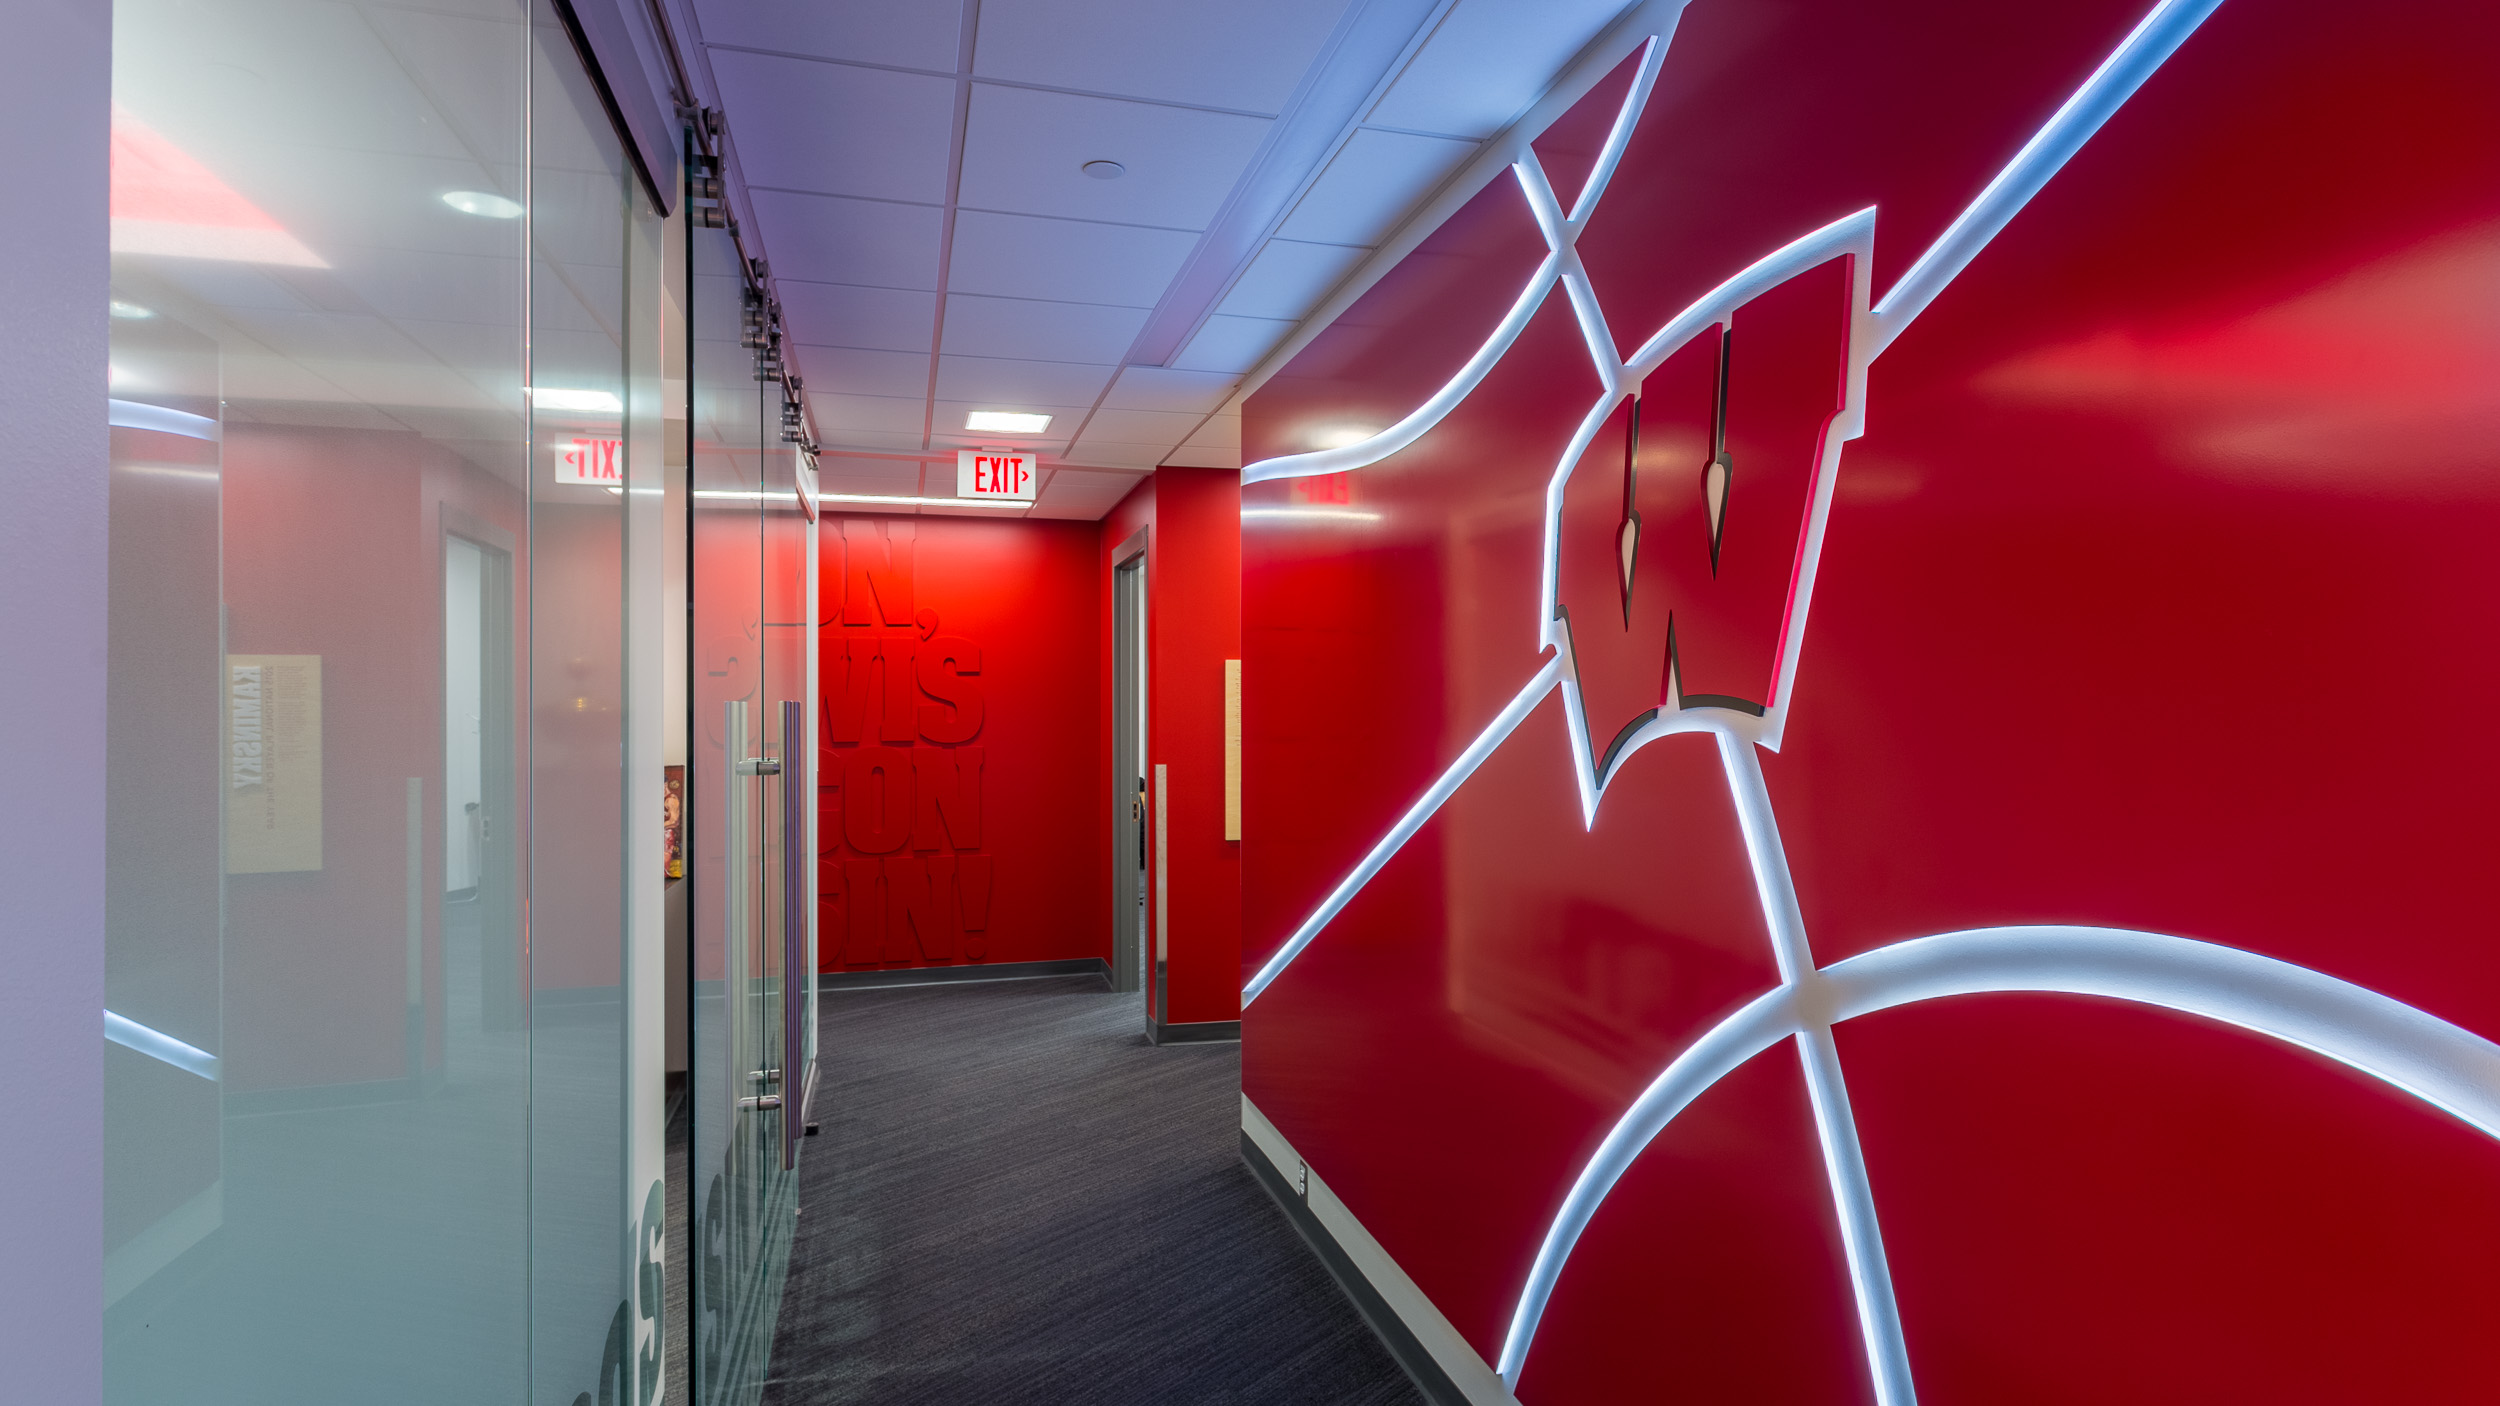 University of Wisconsin - Basketball Offices Backlit Acrylic Logo Feature Wall